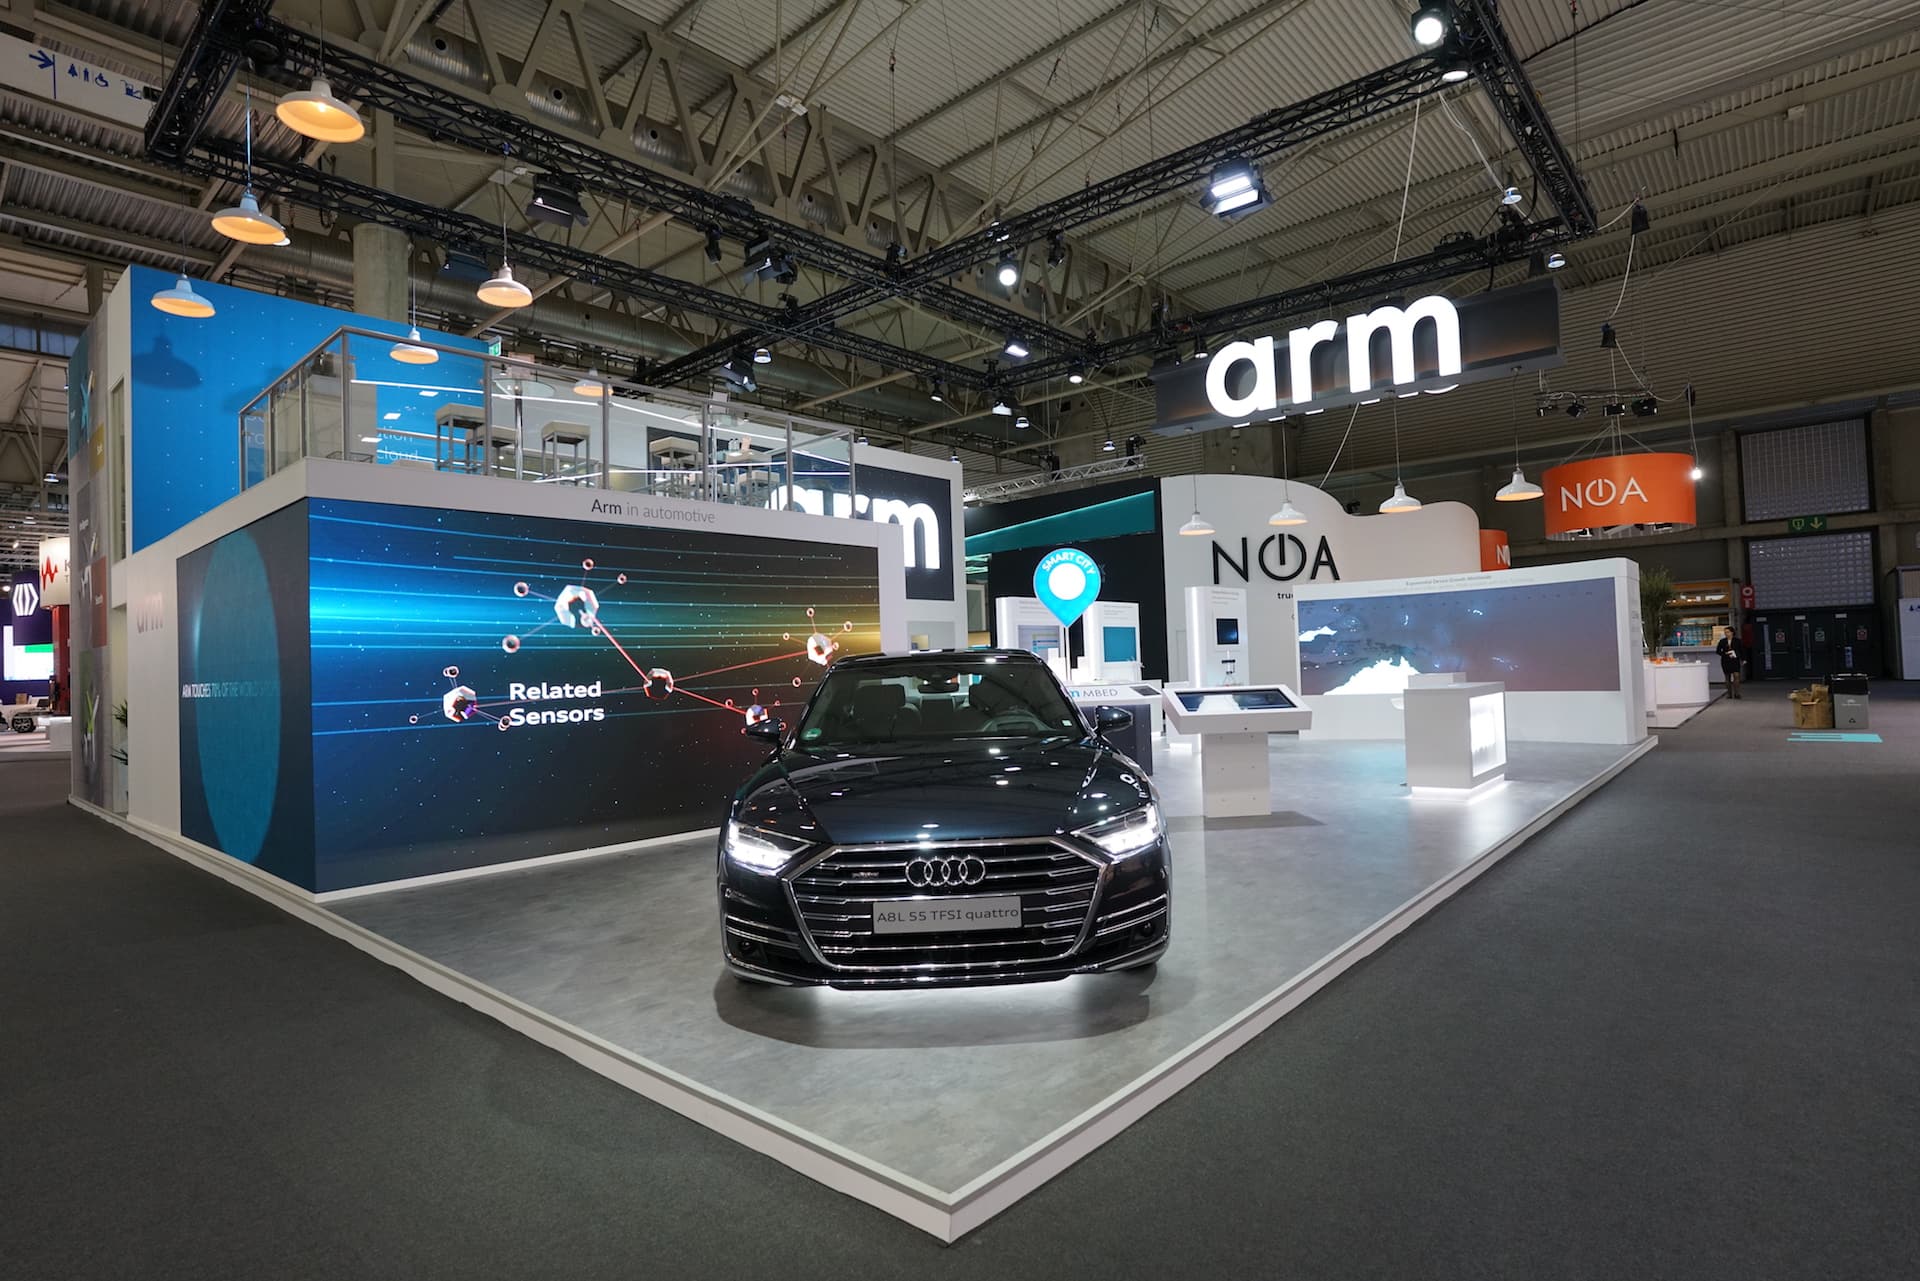 Arm at Mobile World congress, events